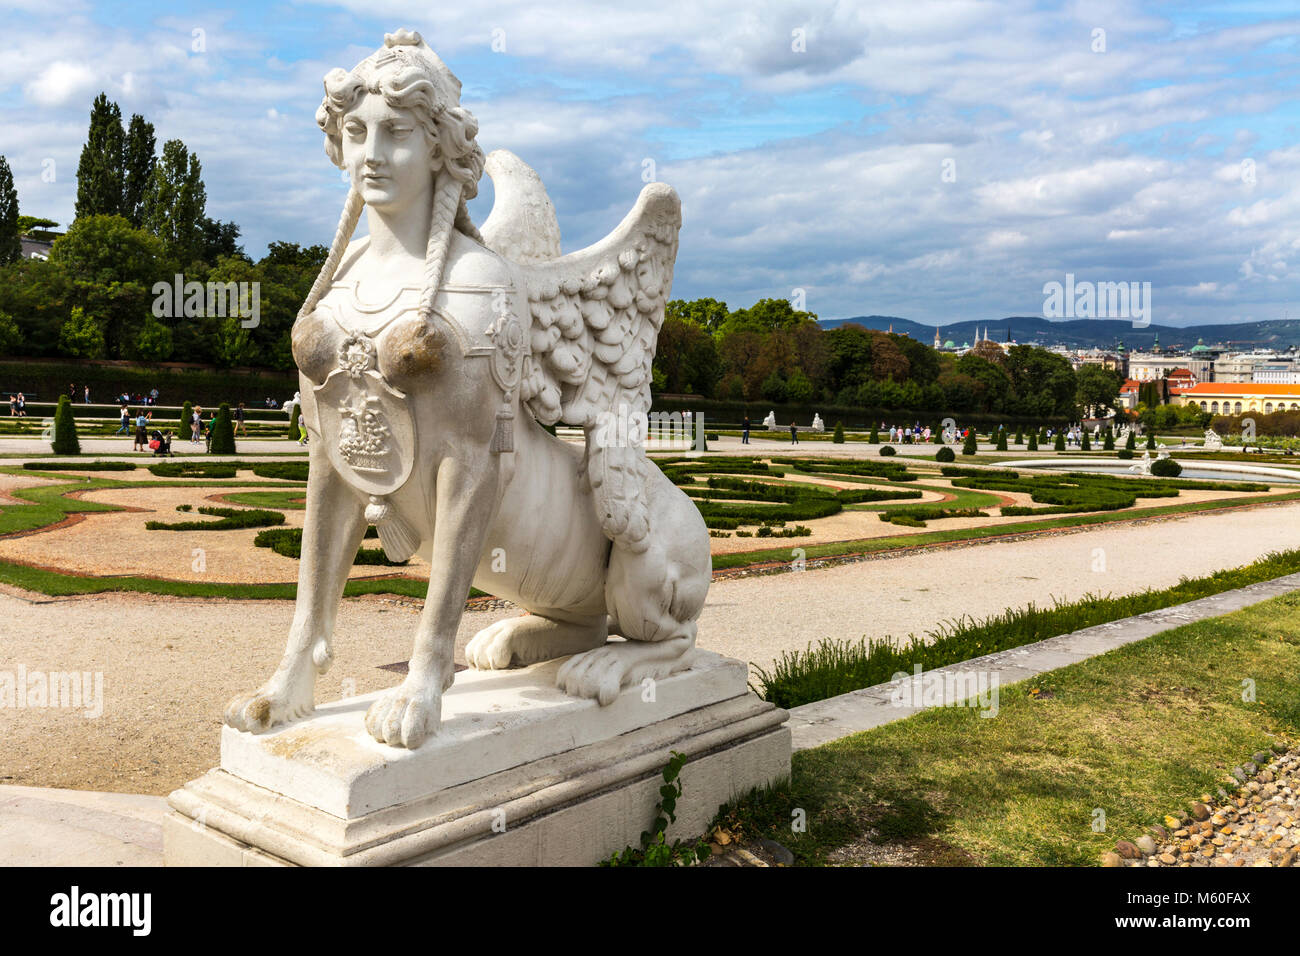 One of the many Sphinx statues in lower Belvedere Palace gardens, Wien, Vienna, Austria. Stock Photo